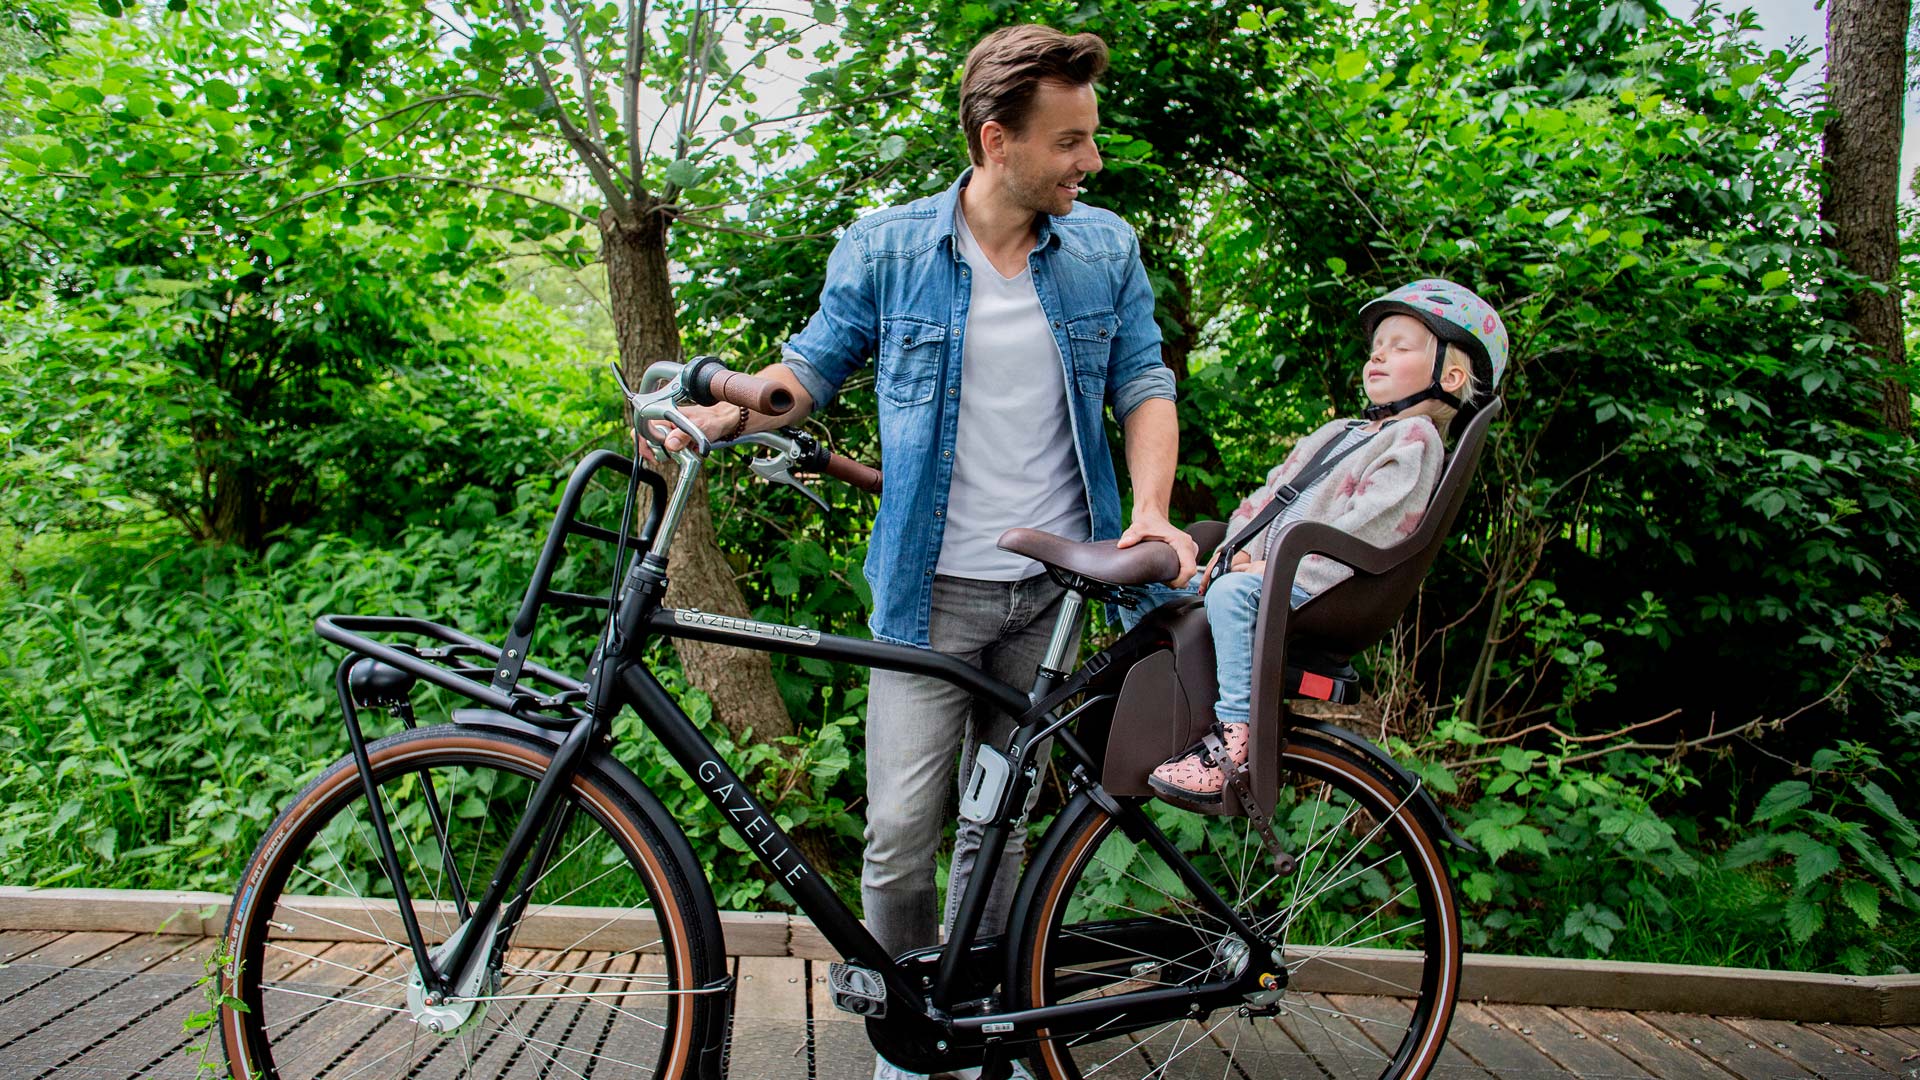 How Safe Is a Front Mount Child Bike Seat? - Do Little Bike Seats